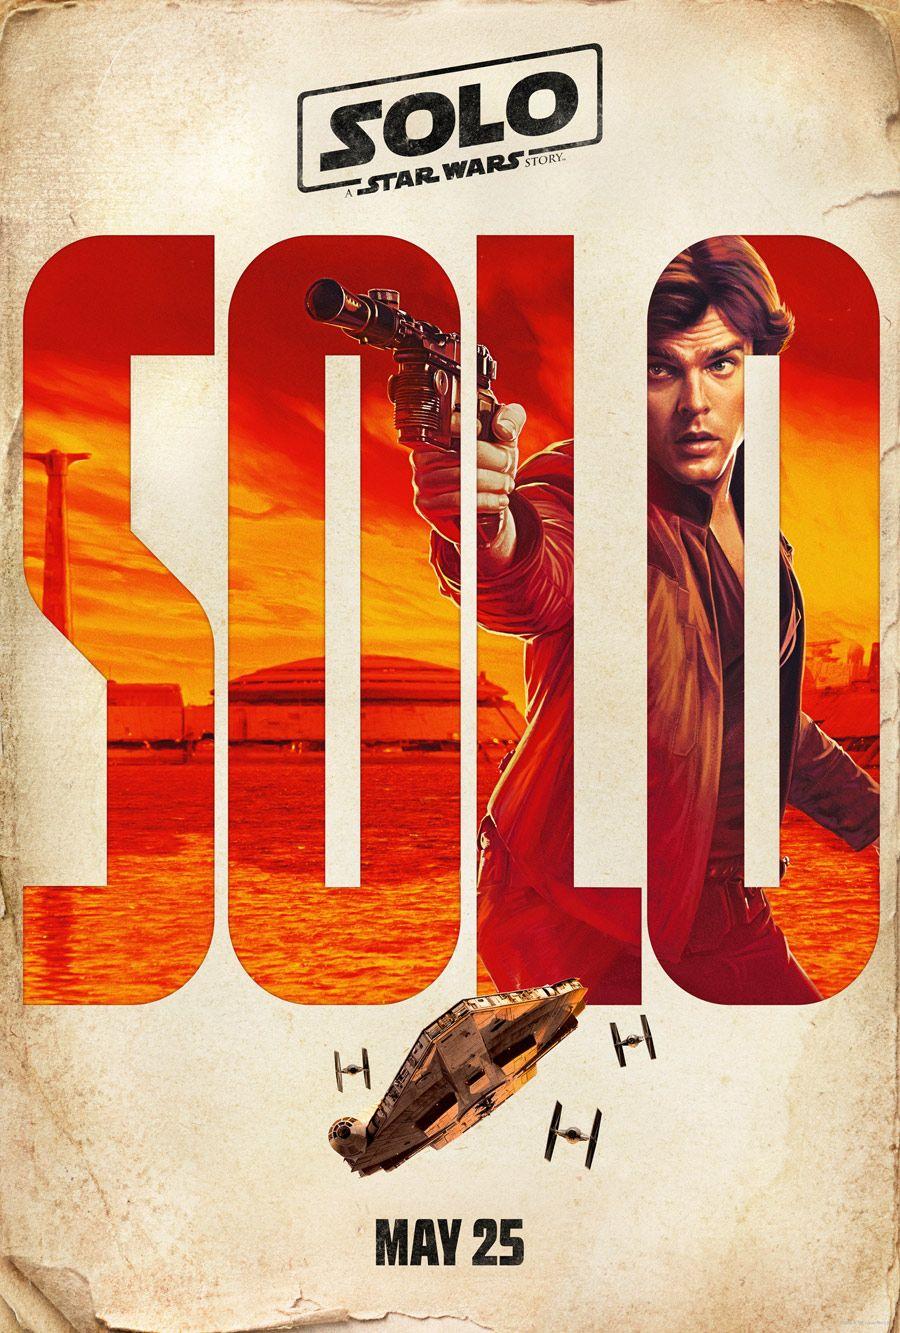 We Love These New Solo: A Star Wars Story Teaser Posters